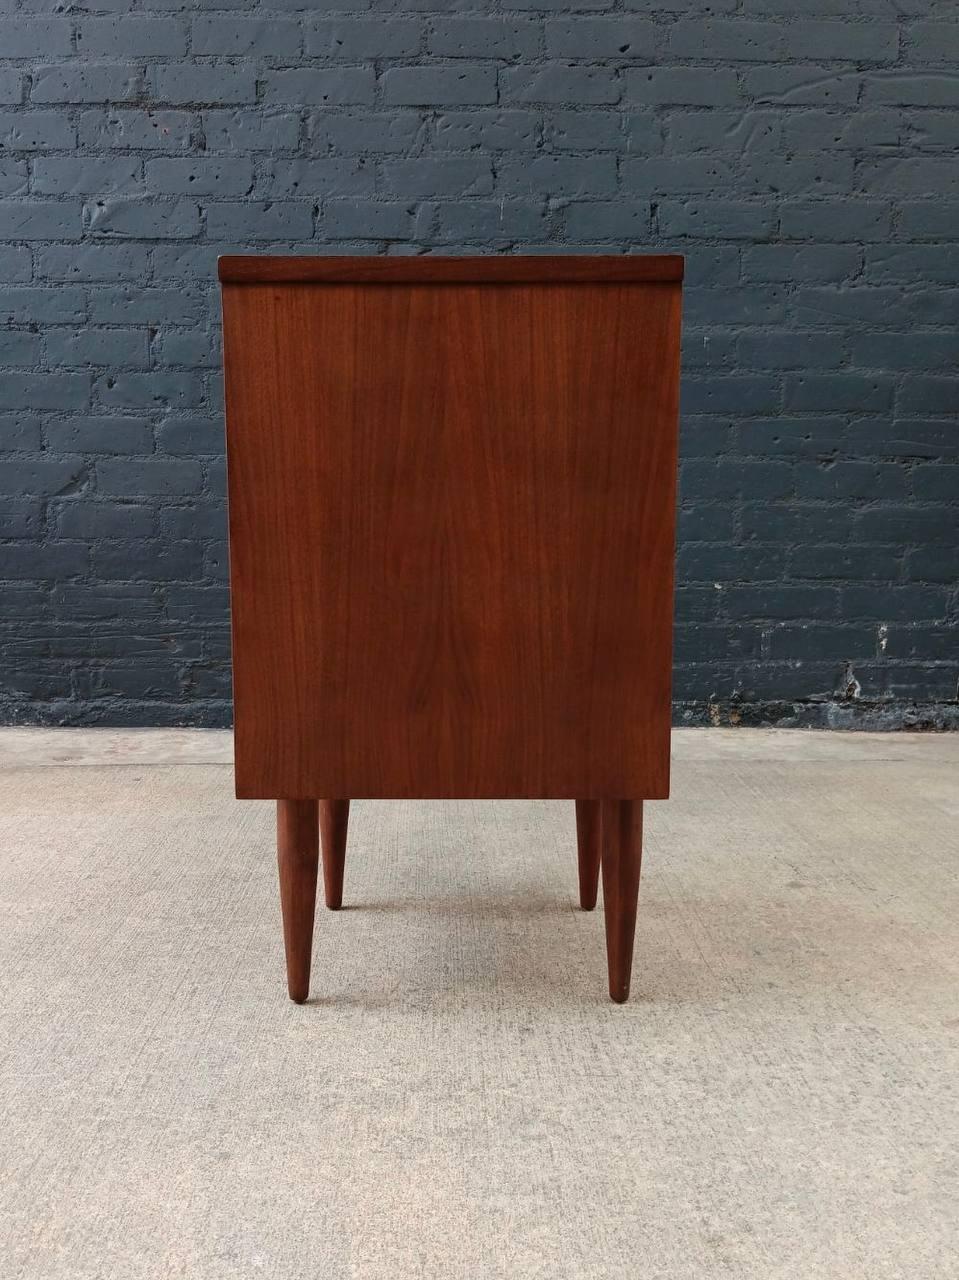 Mid-20th Century Newly Refinished - Mid-Century Modern Walnut Writing Desk by Harmony House For Sale